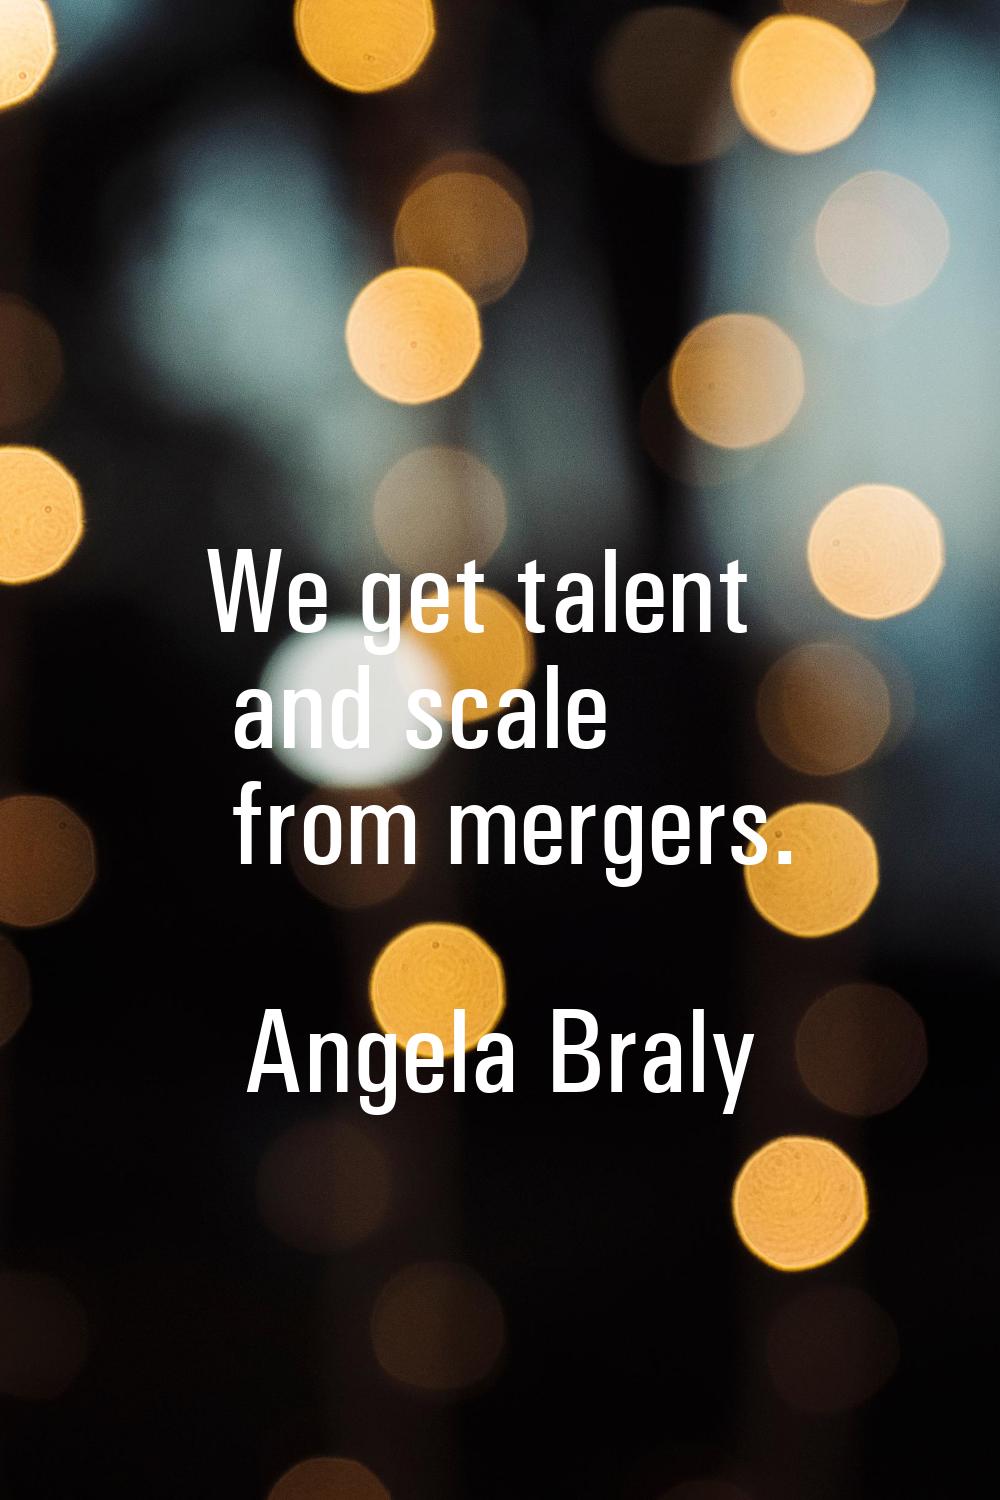 We get talent and scale from mergers.